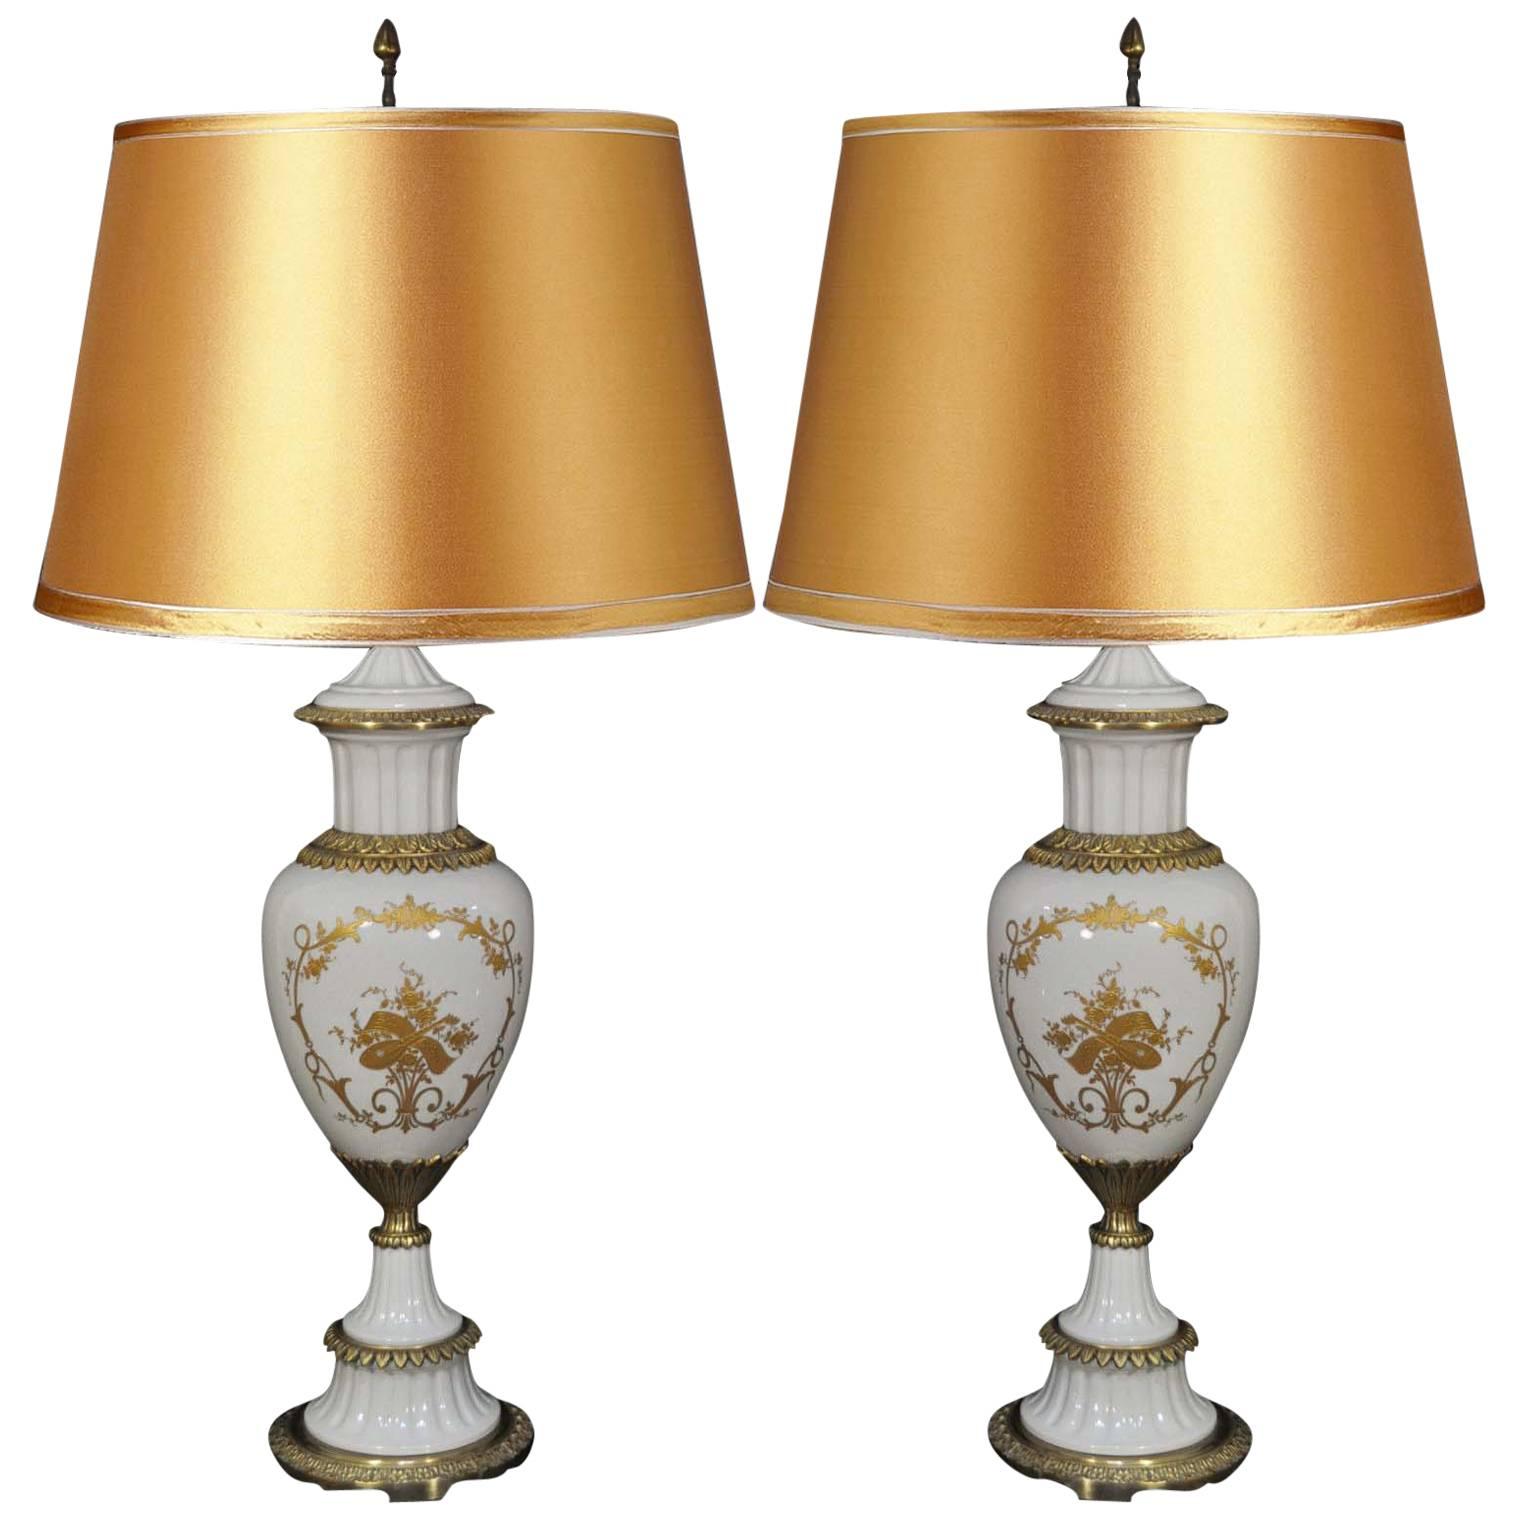 Pair of Sèvres French Hand-Painted Porcelain Urn Form Table Lamps White & Gold